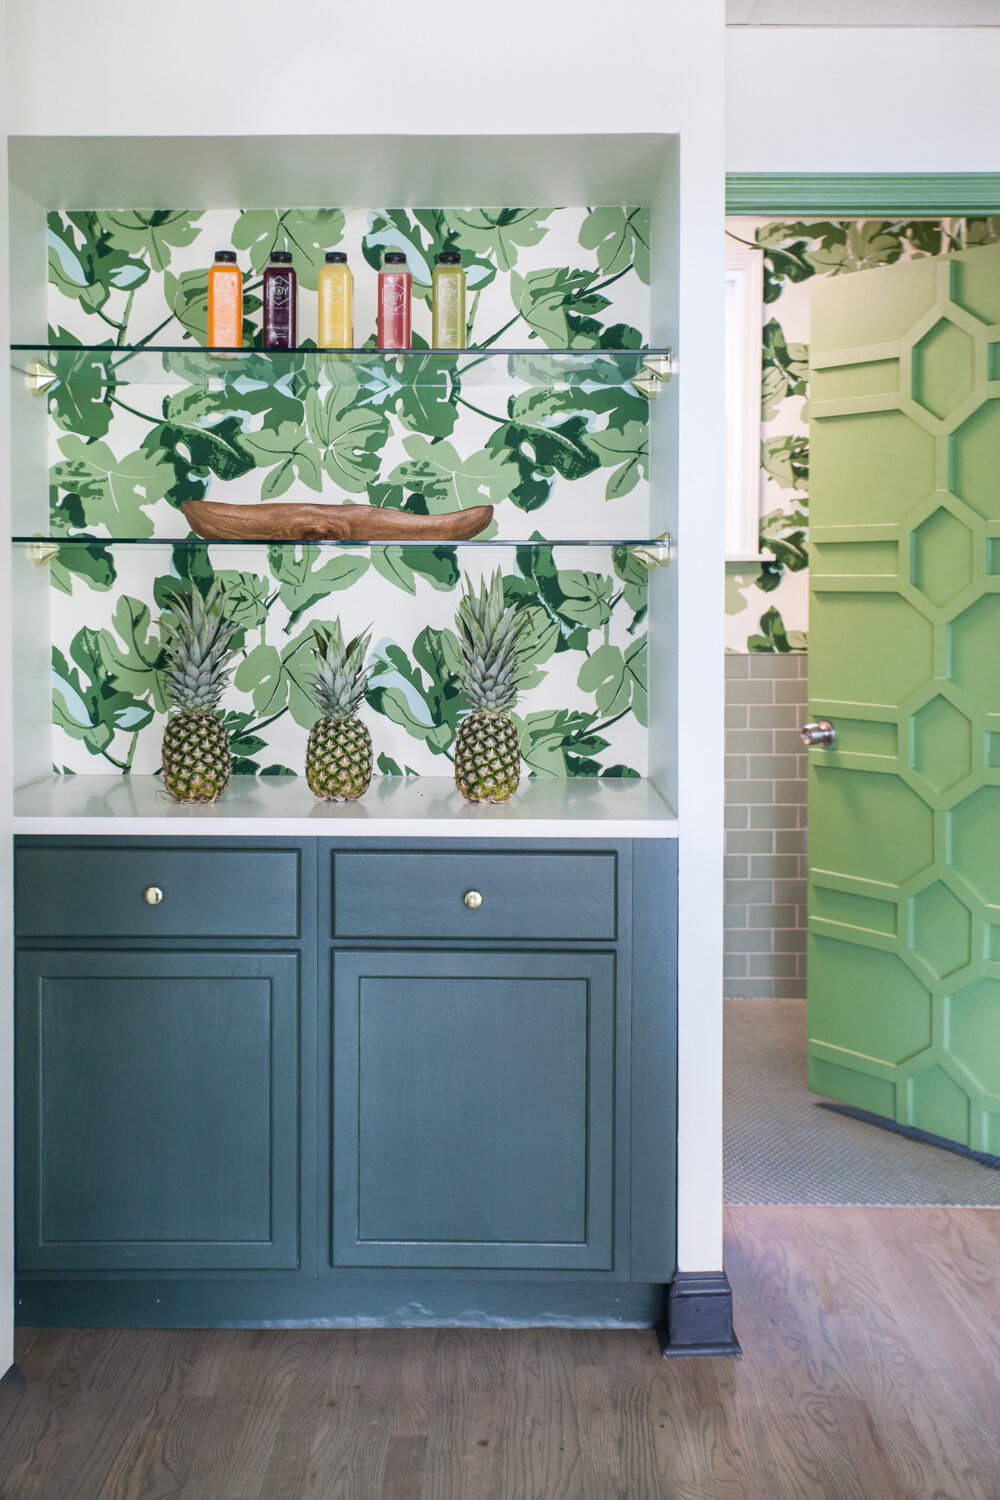 A welcoming Peter Dunham Fig Leaf Wallpaper, with glass shelving above a semi-custom cabinet painted in Benjamin Moore Dakota Shadow (448). Custom millwork door leads to a restroom.